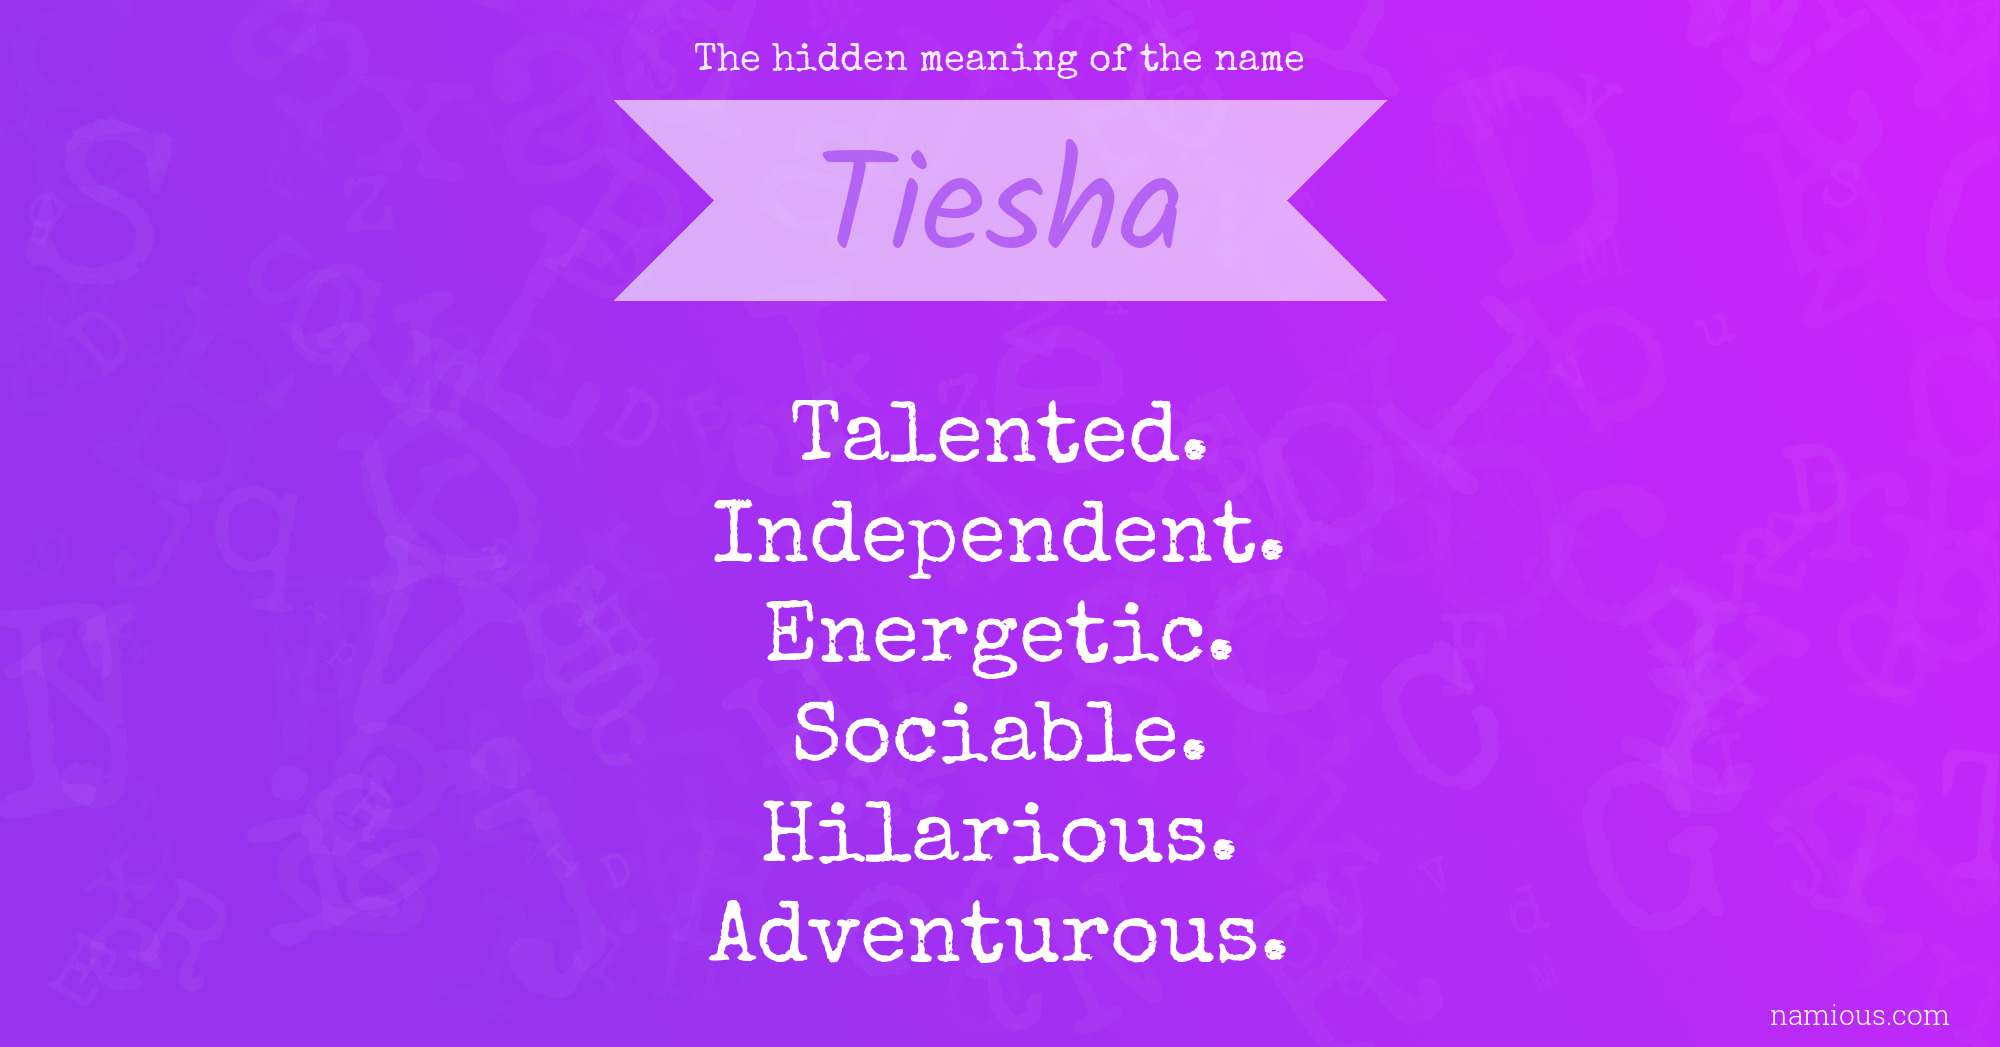 The hidden meaning of the name Tiesha